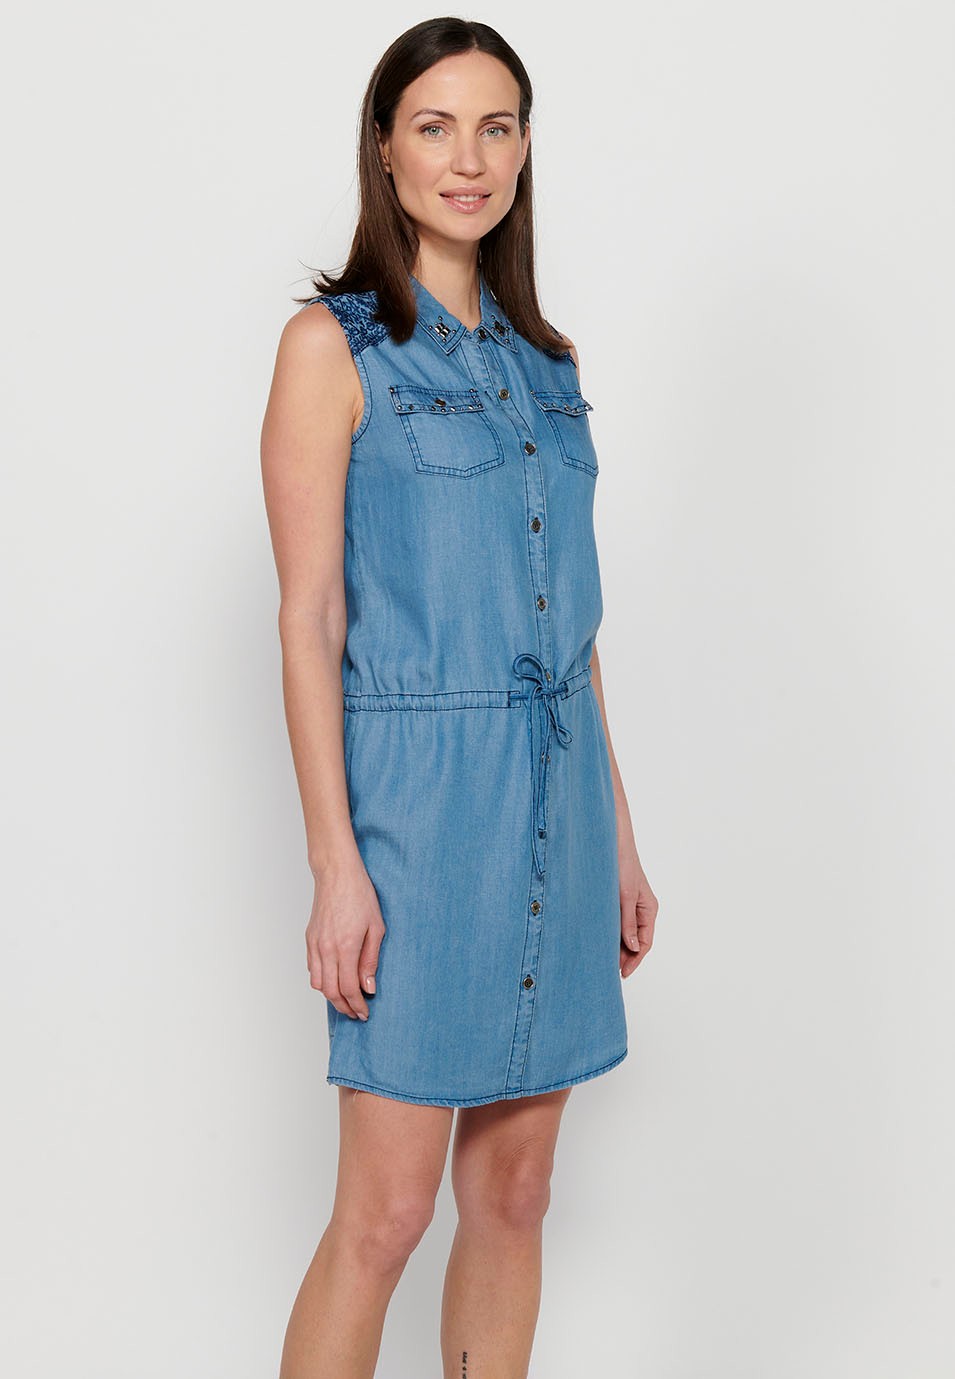 Sleeveless midi dress with front closure with buttons and embroidered details, tight at the waist in Blue for Women 1